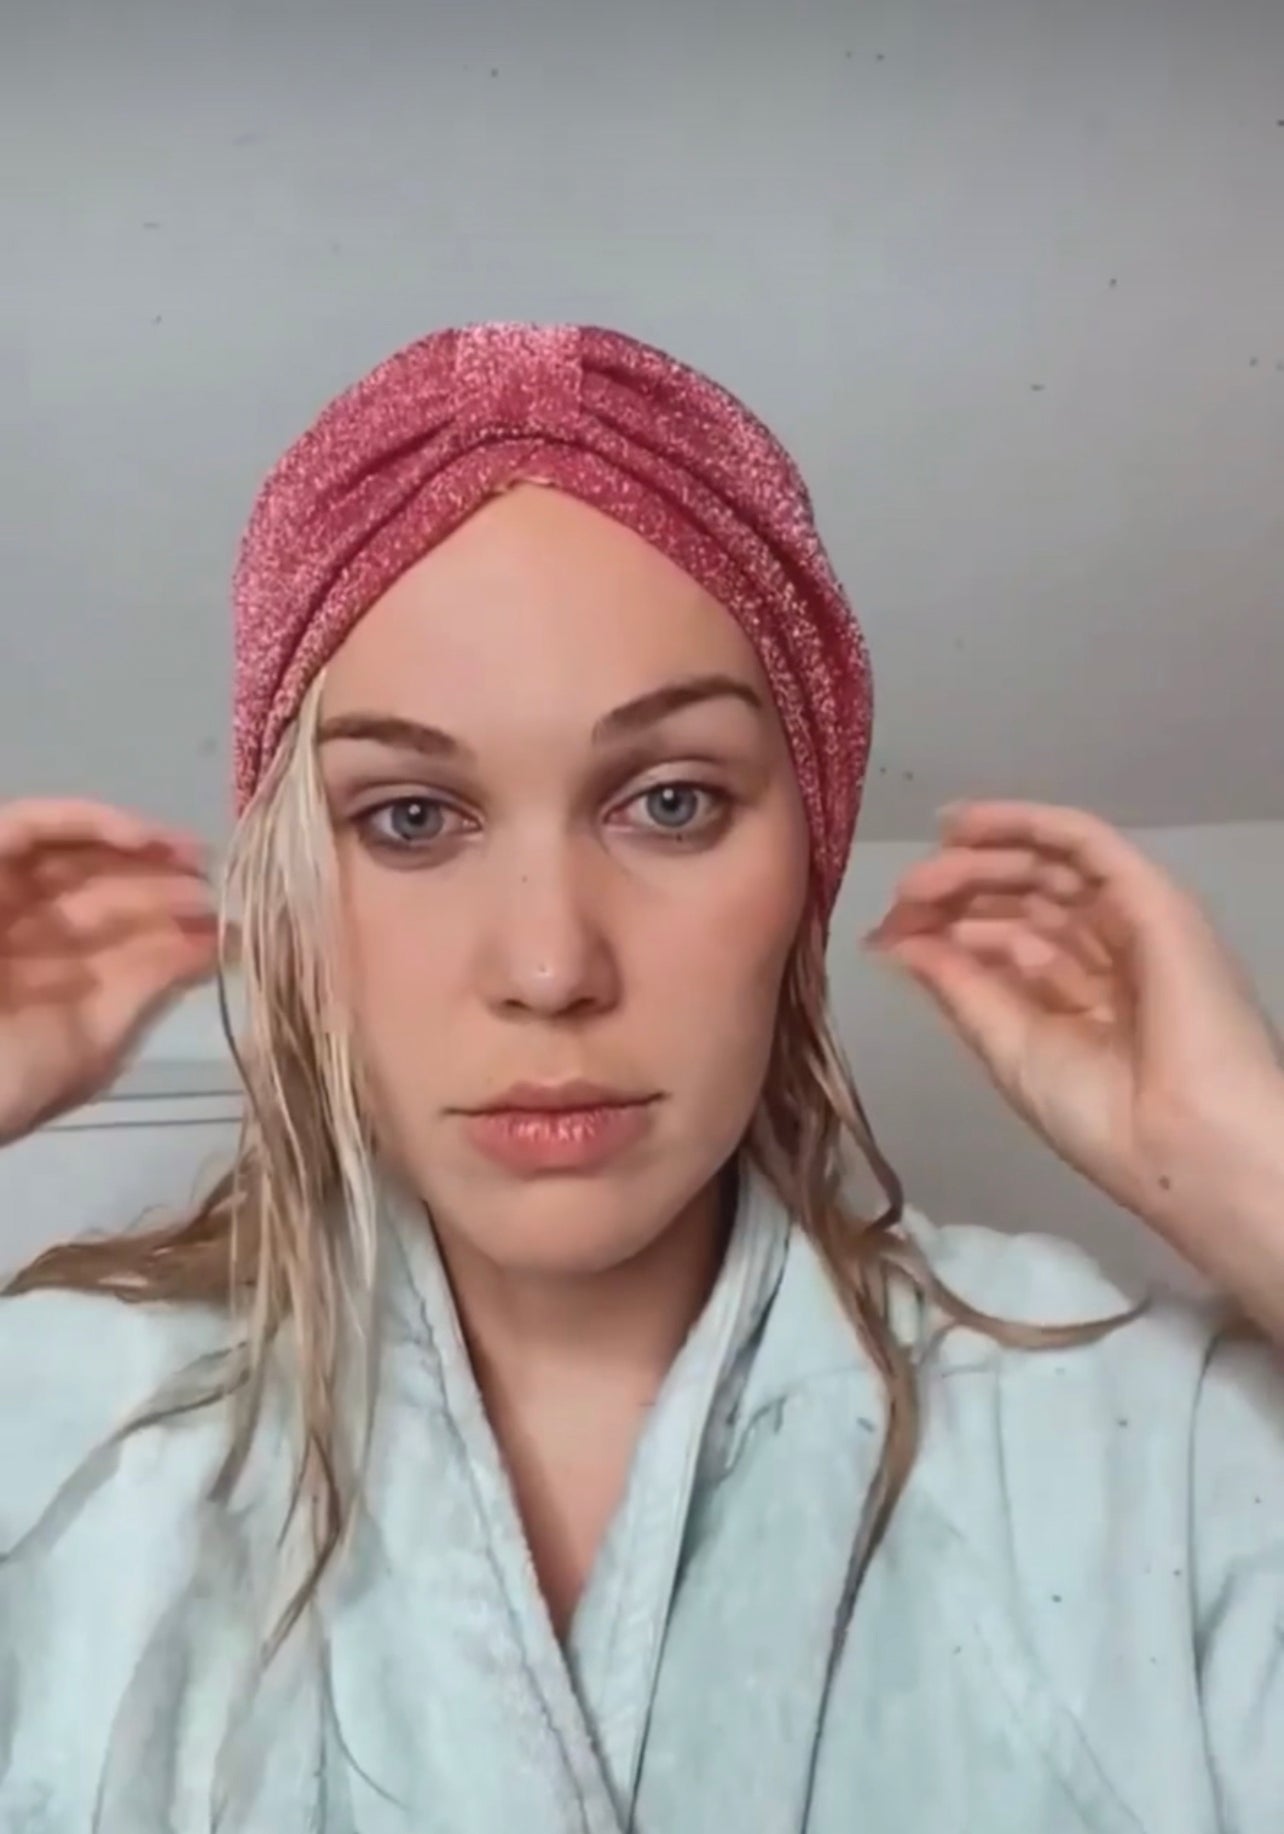 STYLEDRY Turban Shower Cap - Shimmer and Shine X Phoenix Nationale